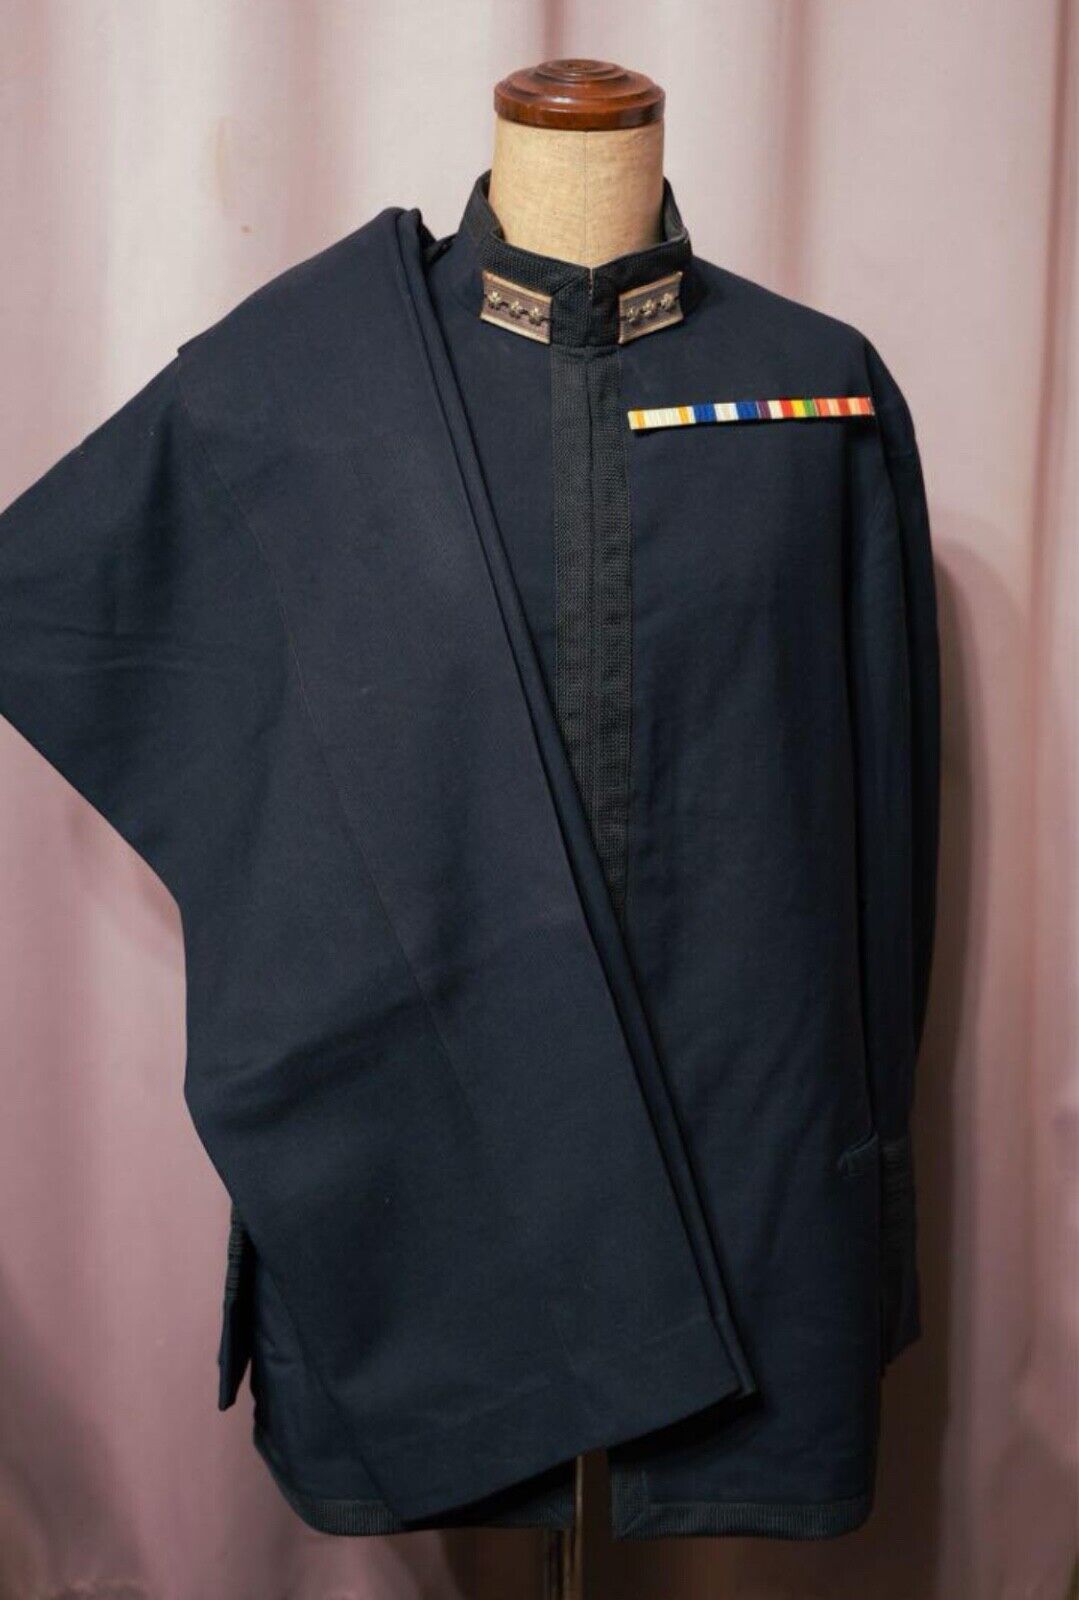 World War II Imperial Japanese Navy Paymaster Colonel Type 1 Uniform